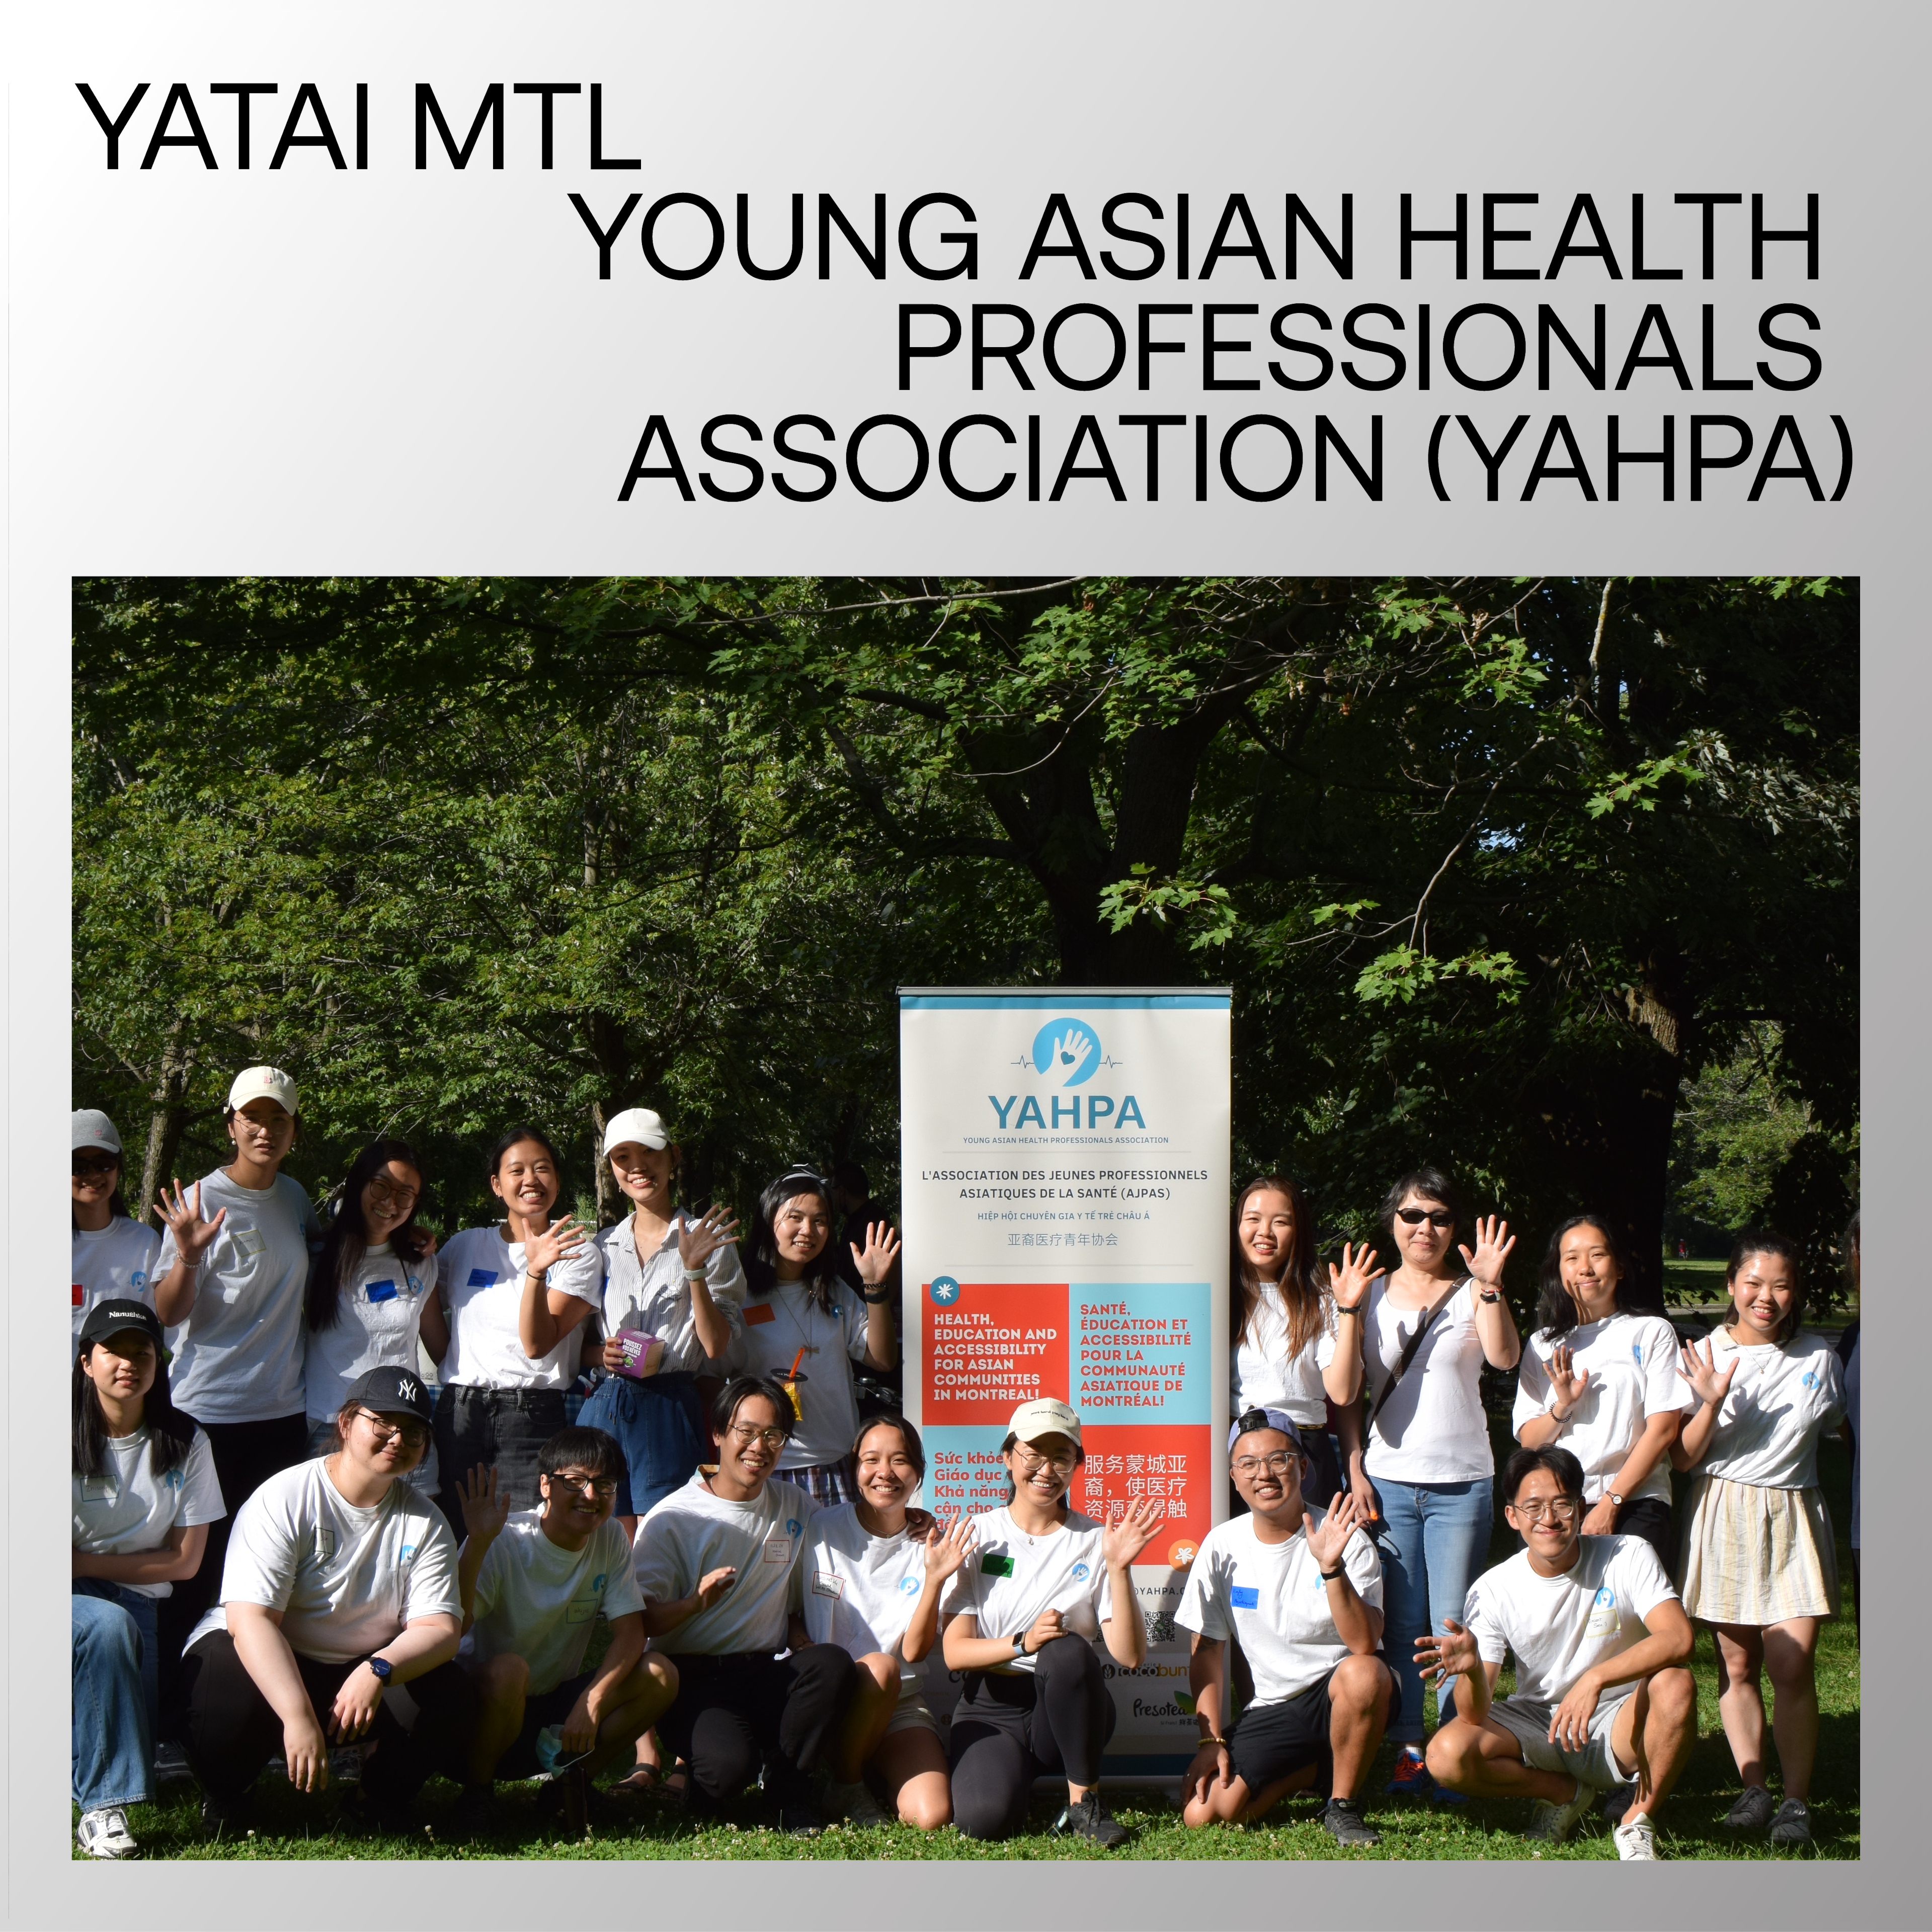  Young Asian Health Professionals Association - YAHPA